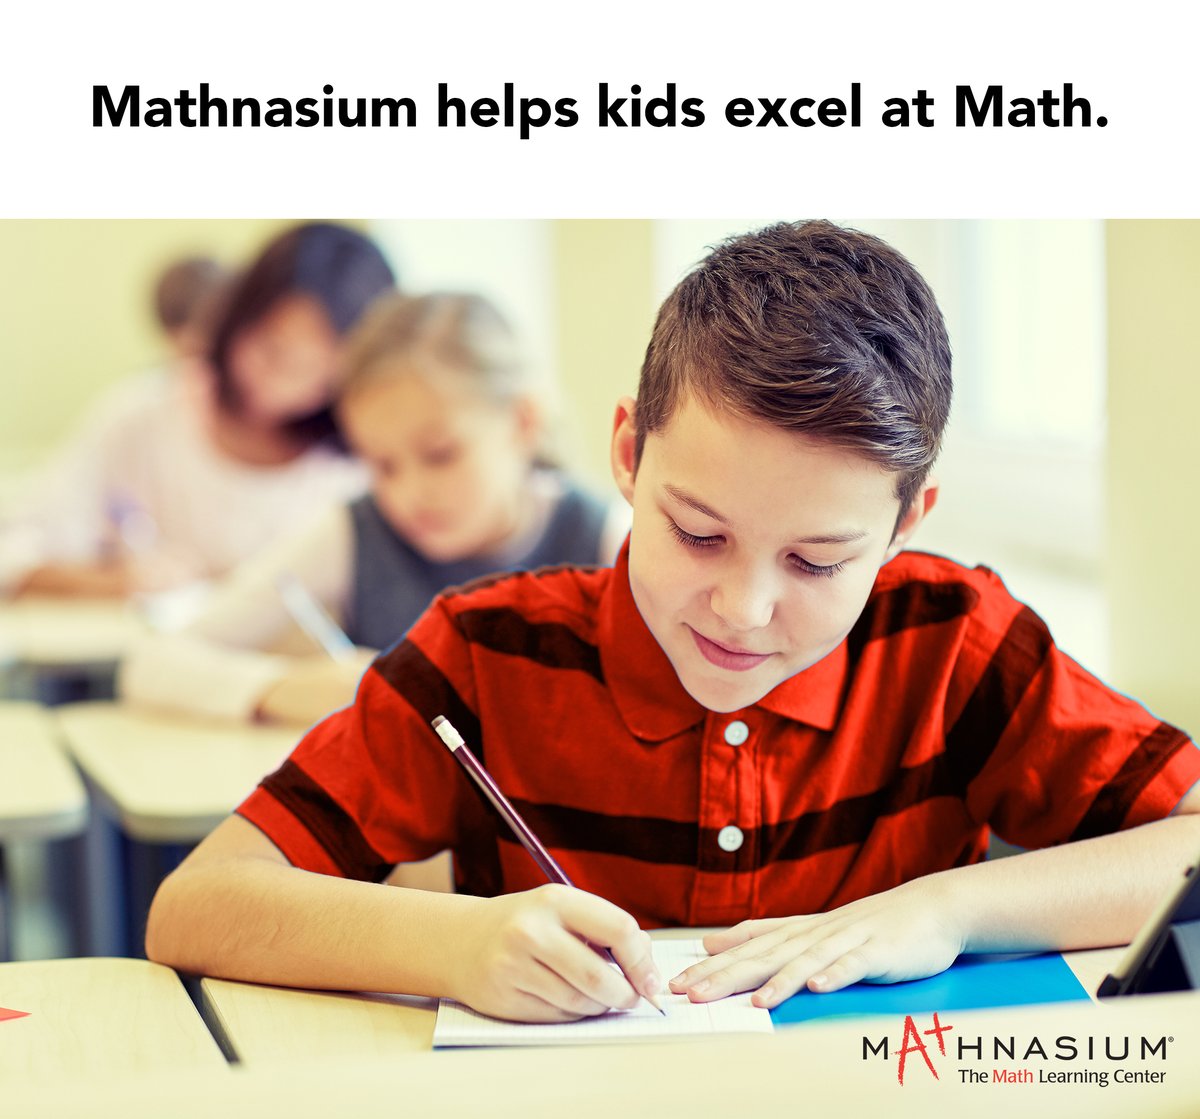 Grassroots Marketing helps kids learn to love math. ❤ 🙋 😁 Could your student use a helping hand? ✍ 😉 grassrootsmarketing.us #mathnasium #mathtutor #mathtest #mathgrade #mathhelp #mathclass